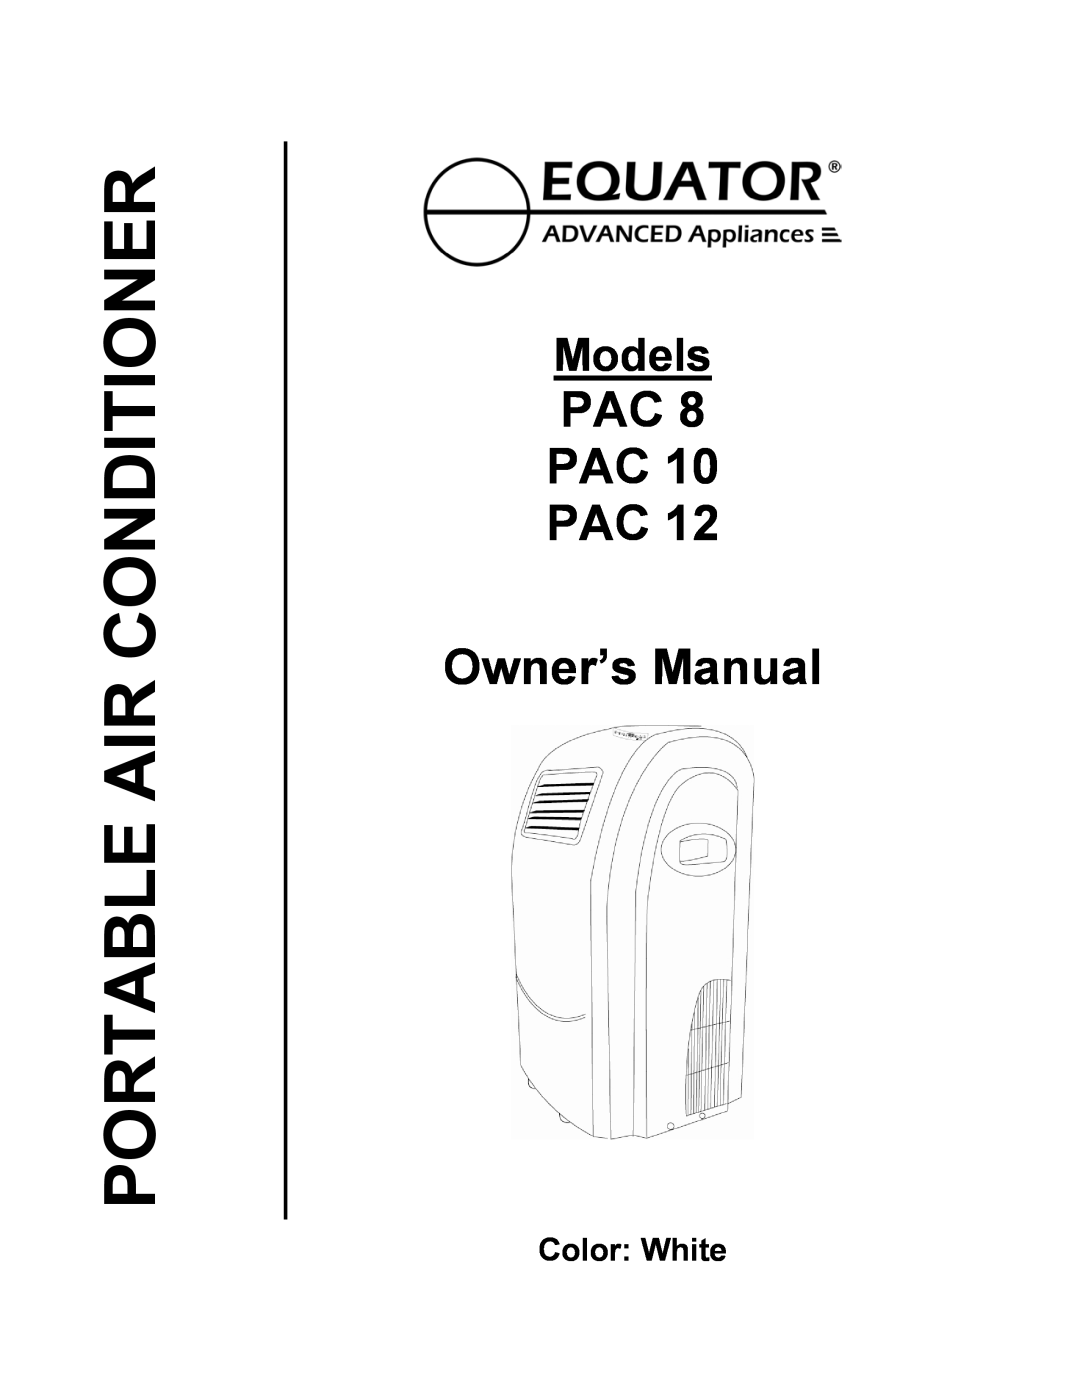 Equator PAC 12, PAC 8, PAC 10 owner manual Models, Portable Air Conditioner, Color White 